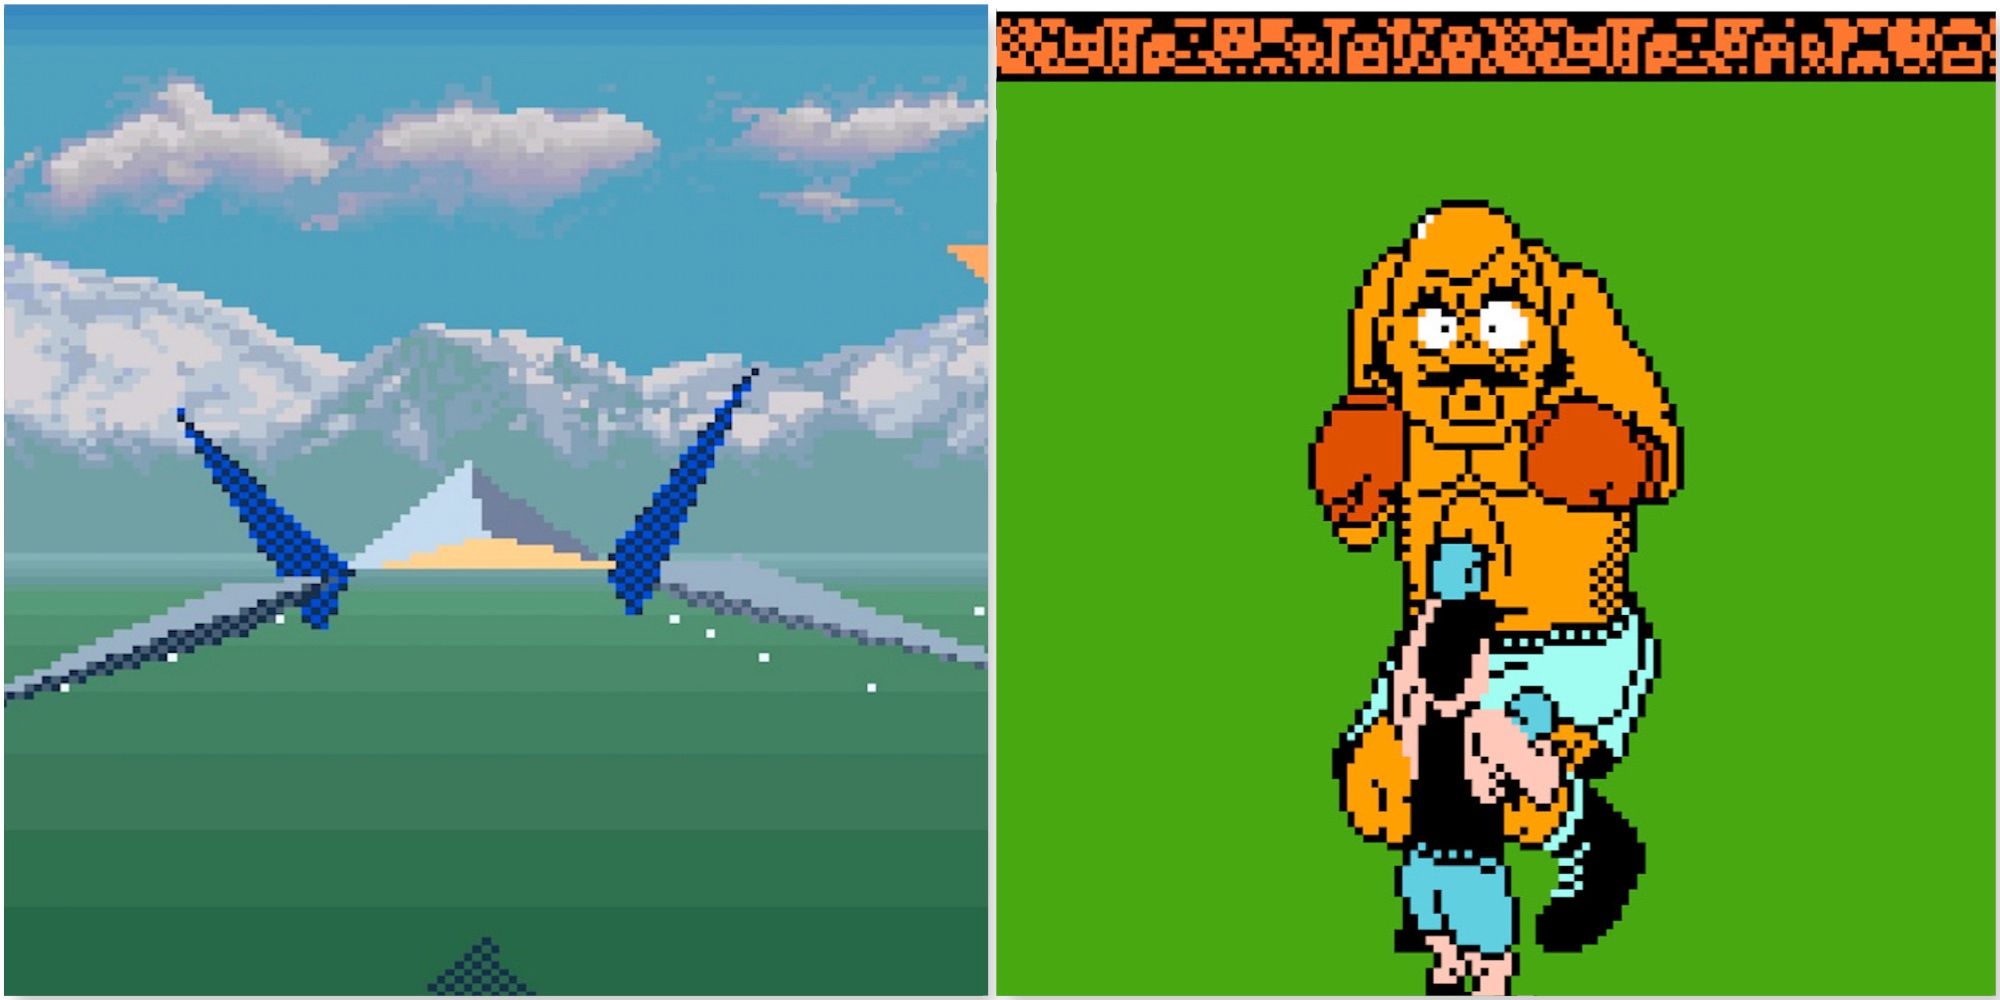 Flying around in Star Fox and Fighting Bald Bull in Punch-Out